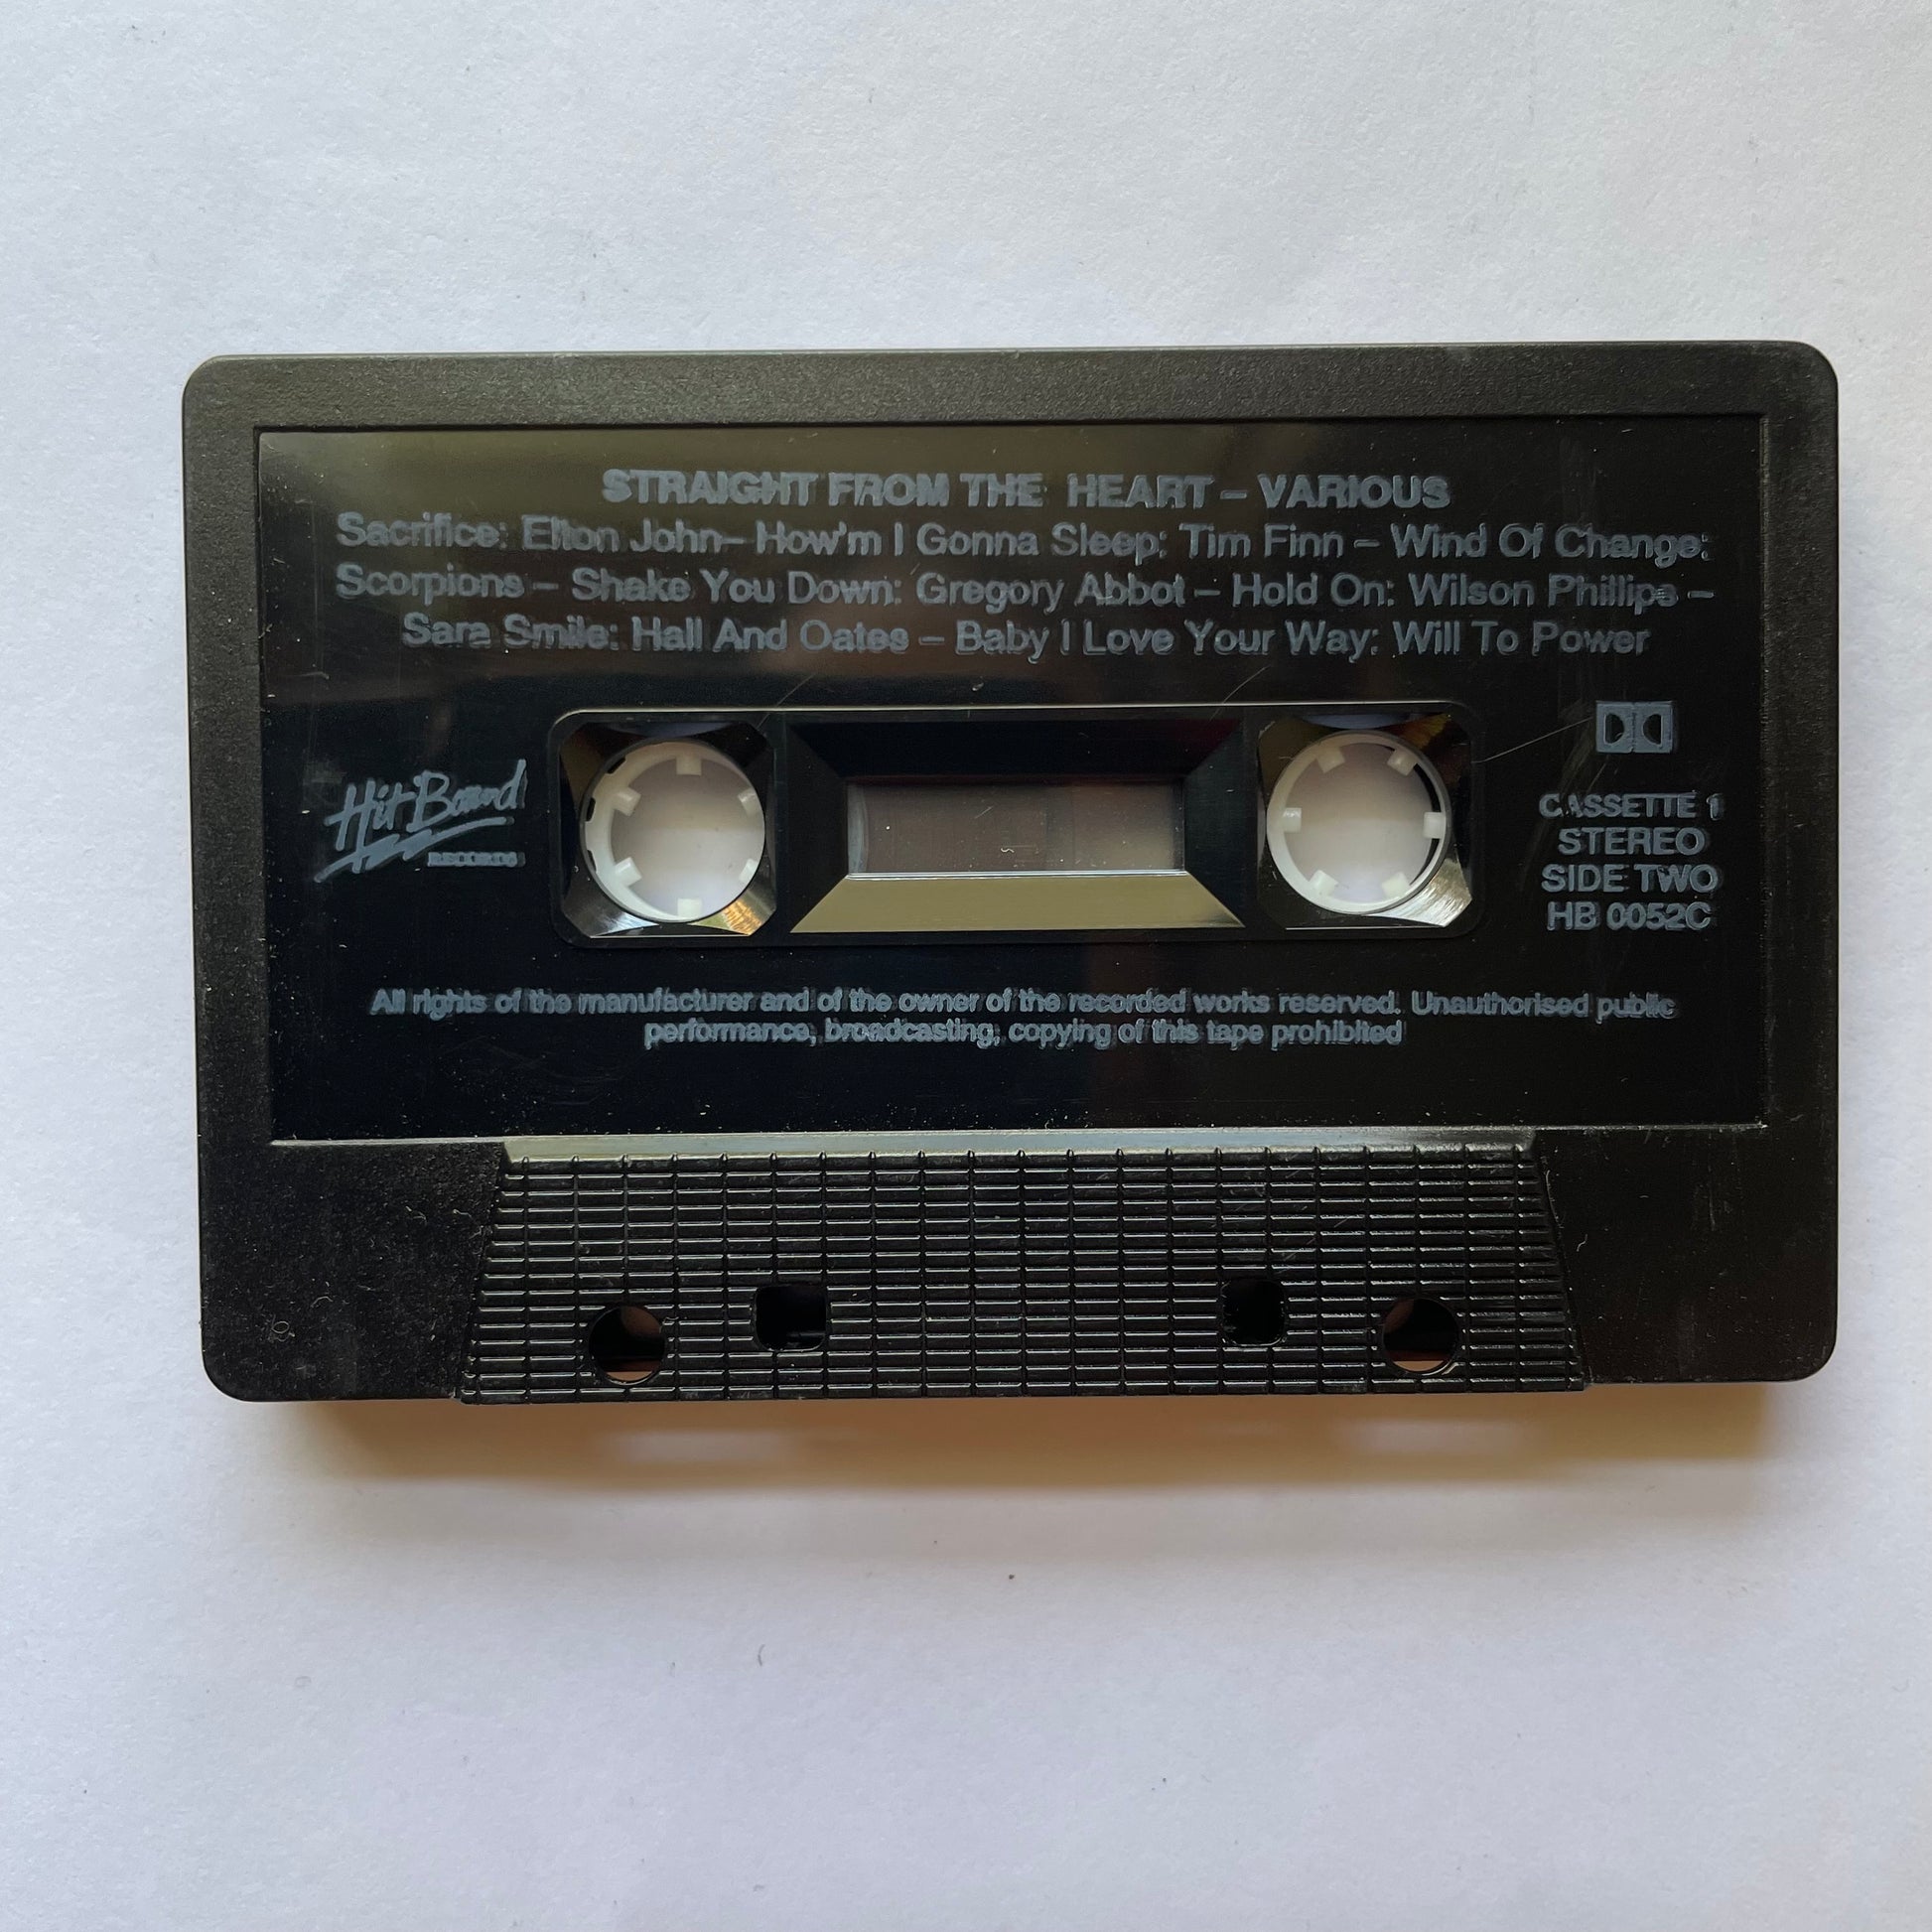 Tape Cassette Straight From The Heart side 2 